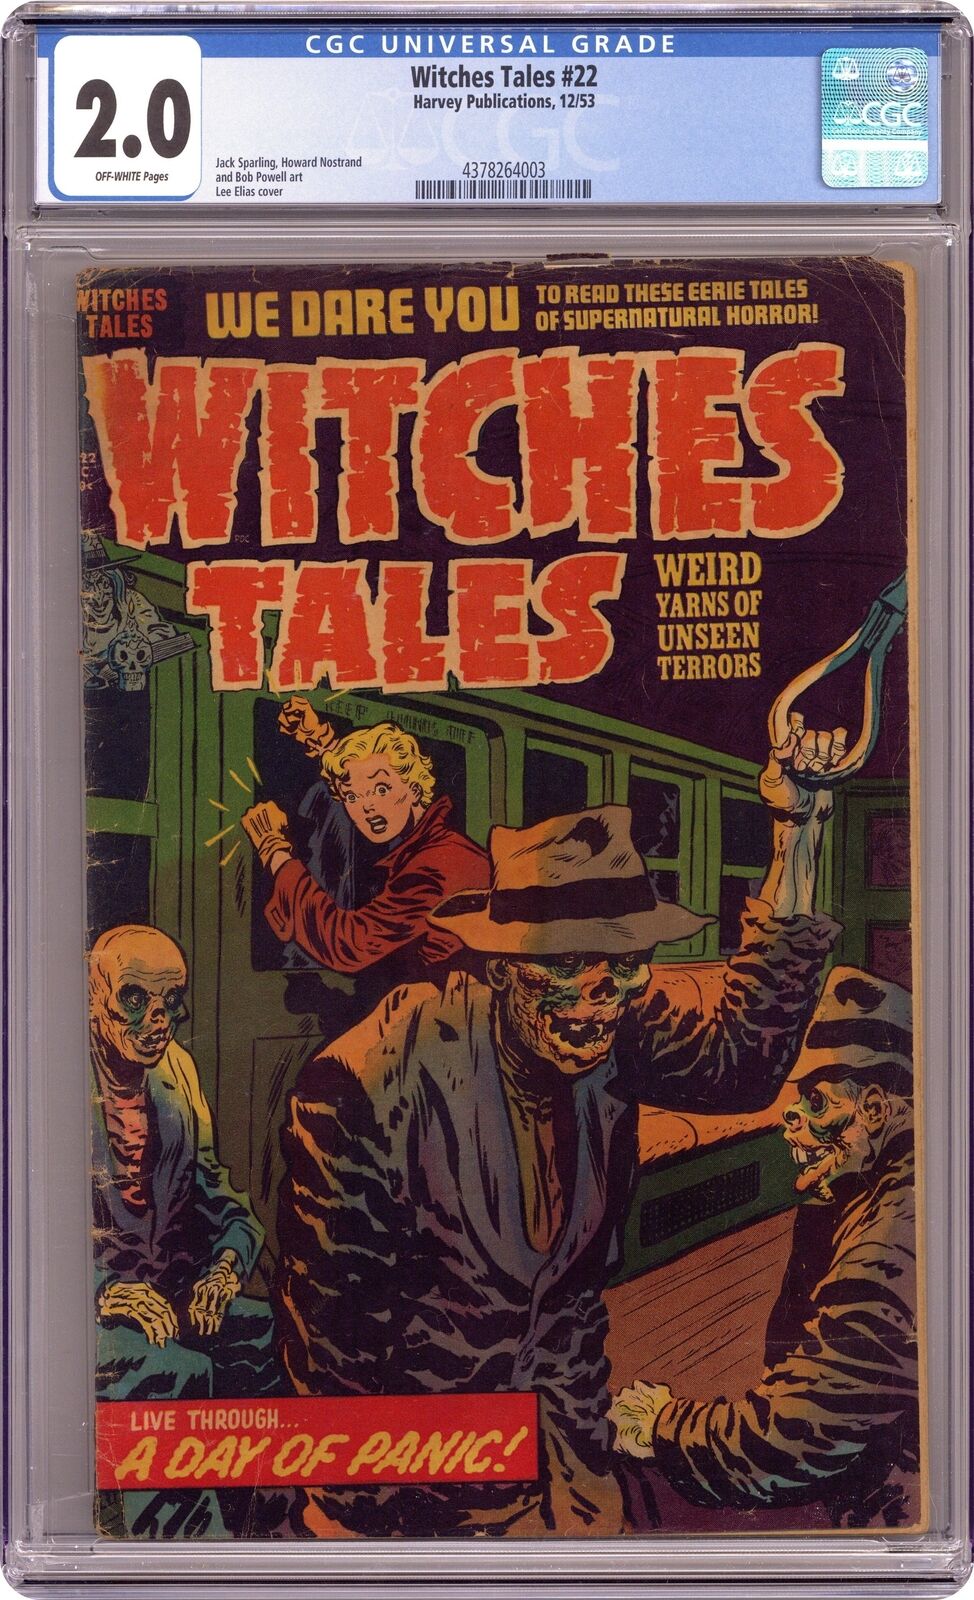 Witches Tales #22 CGC 2.0 1953 4378264003